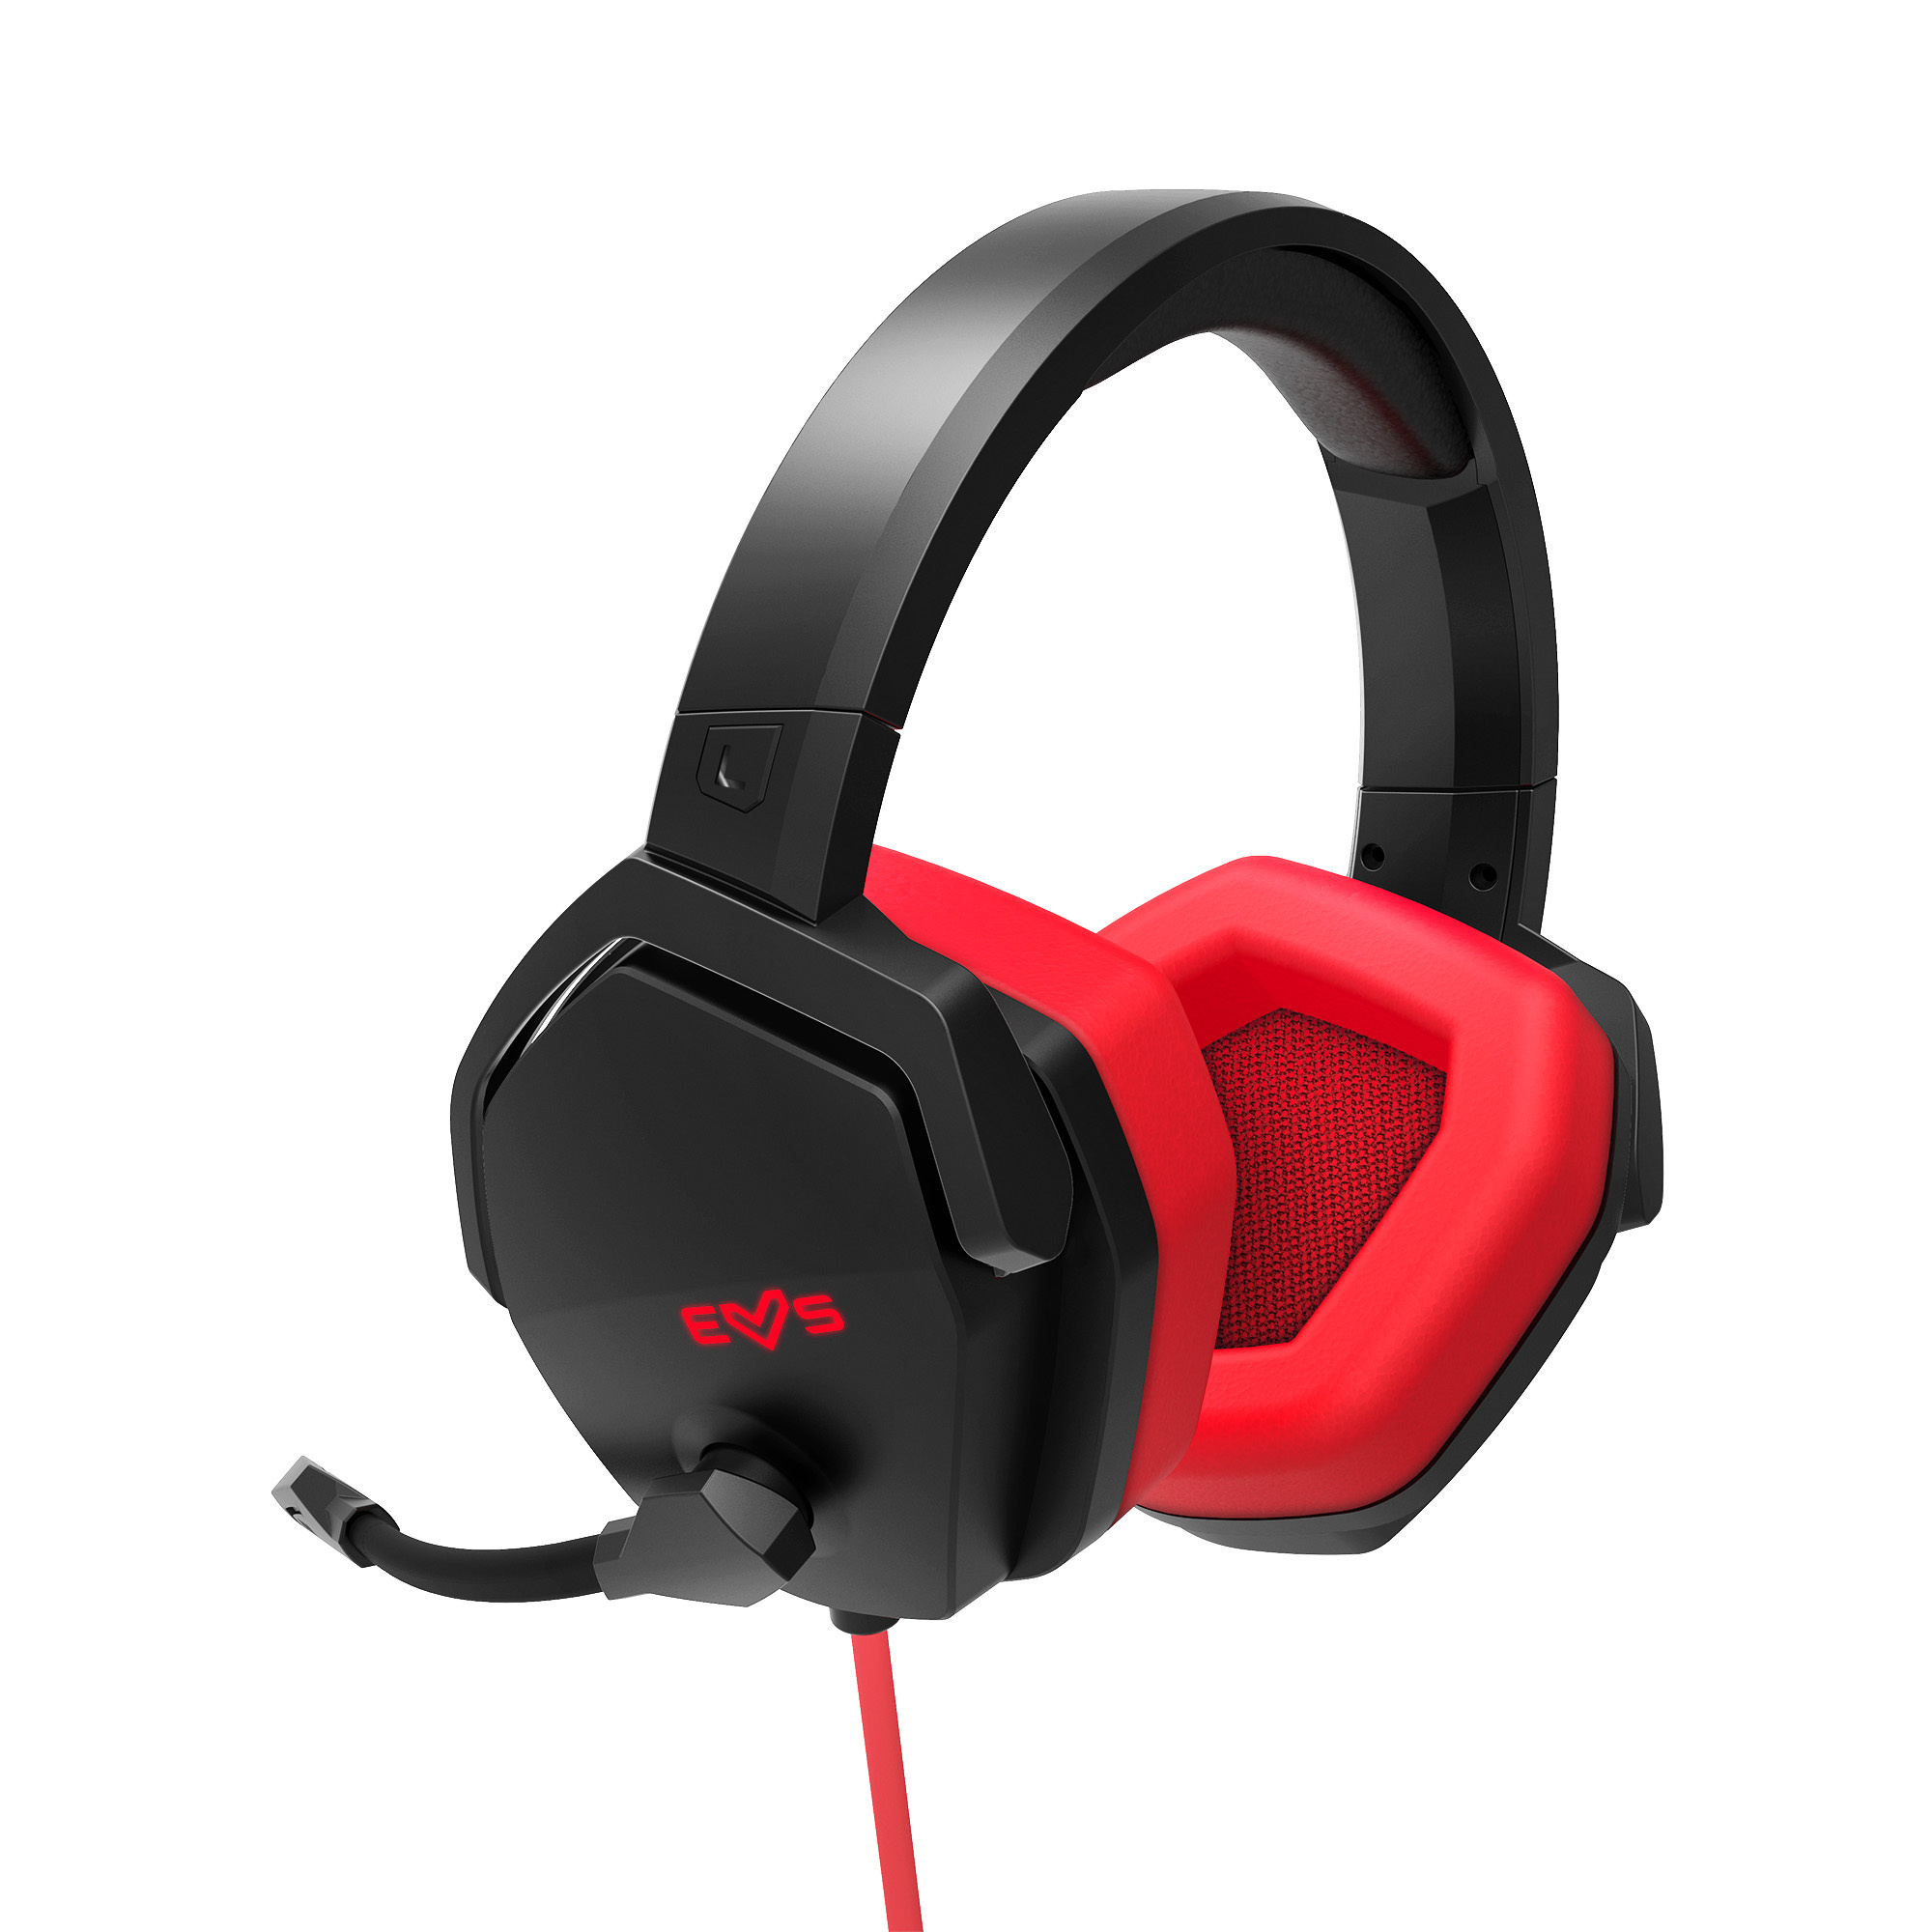 Gamer headset with over-ear protein leather ear pads